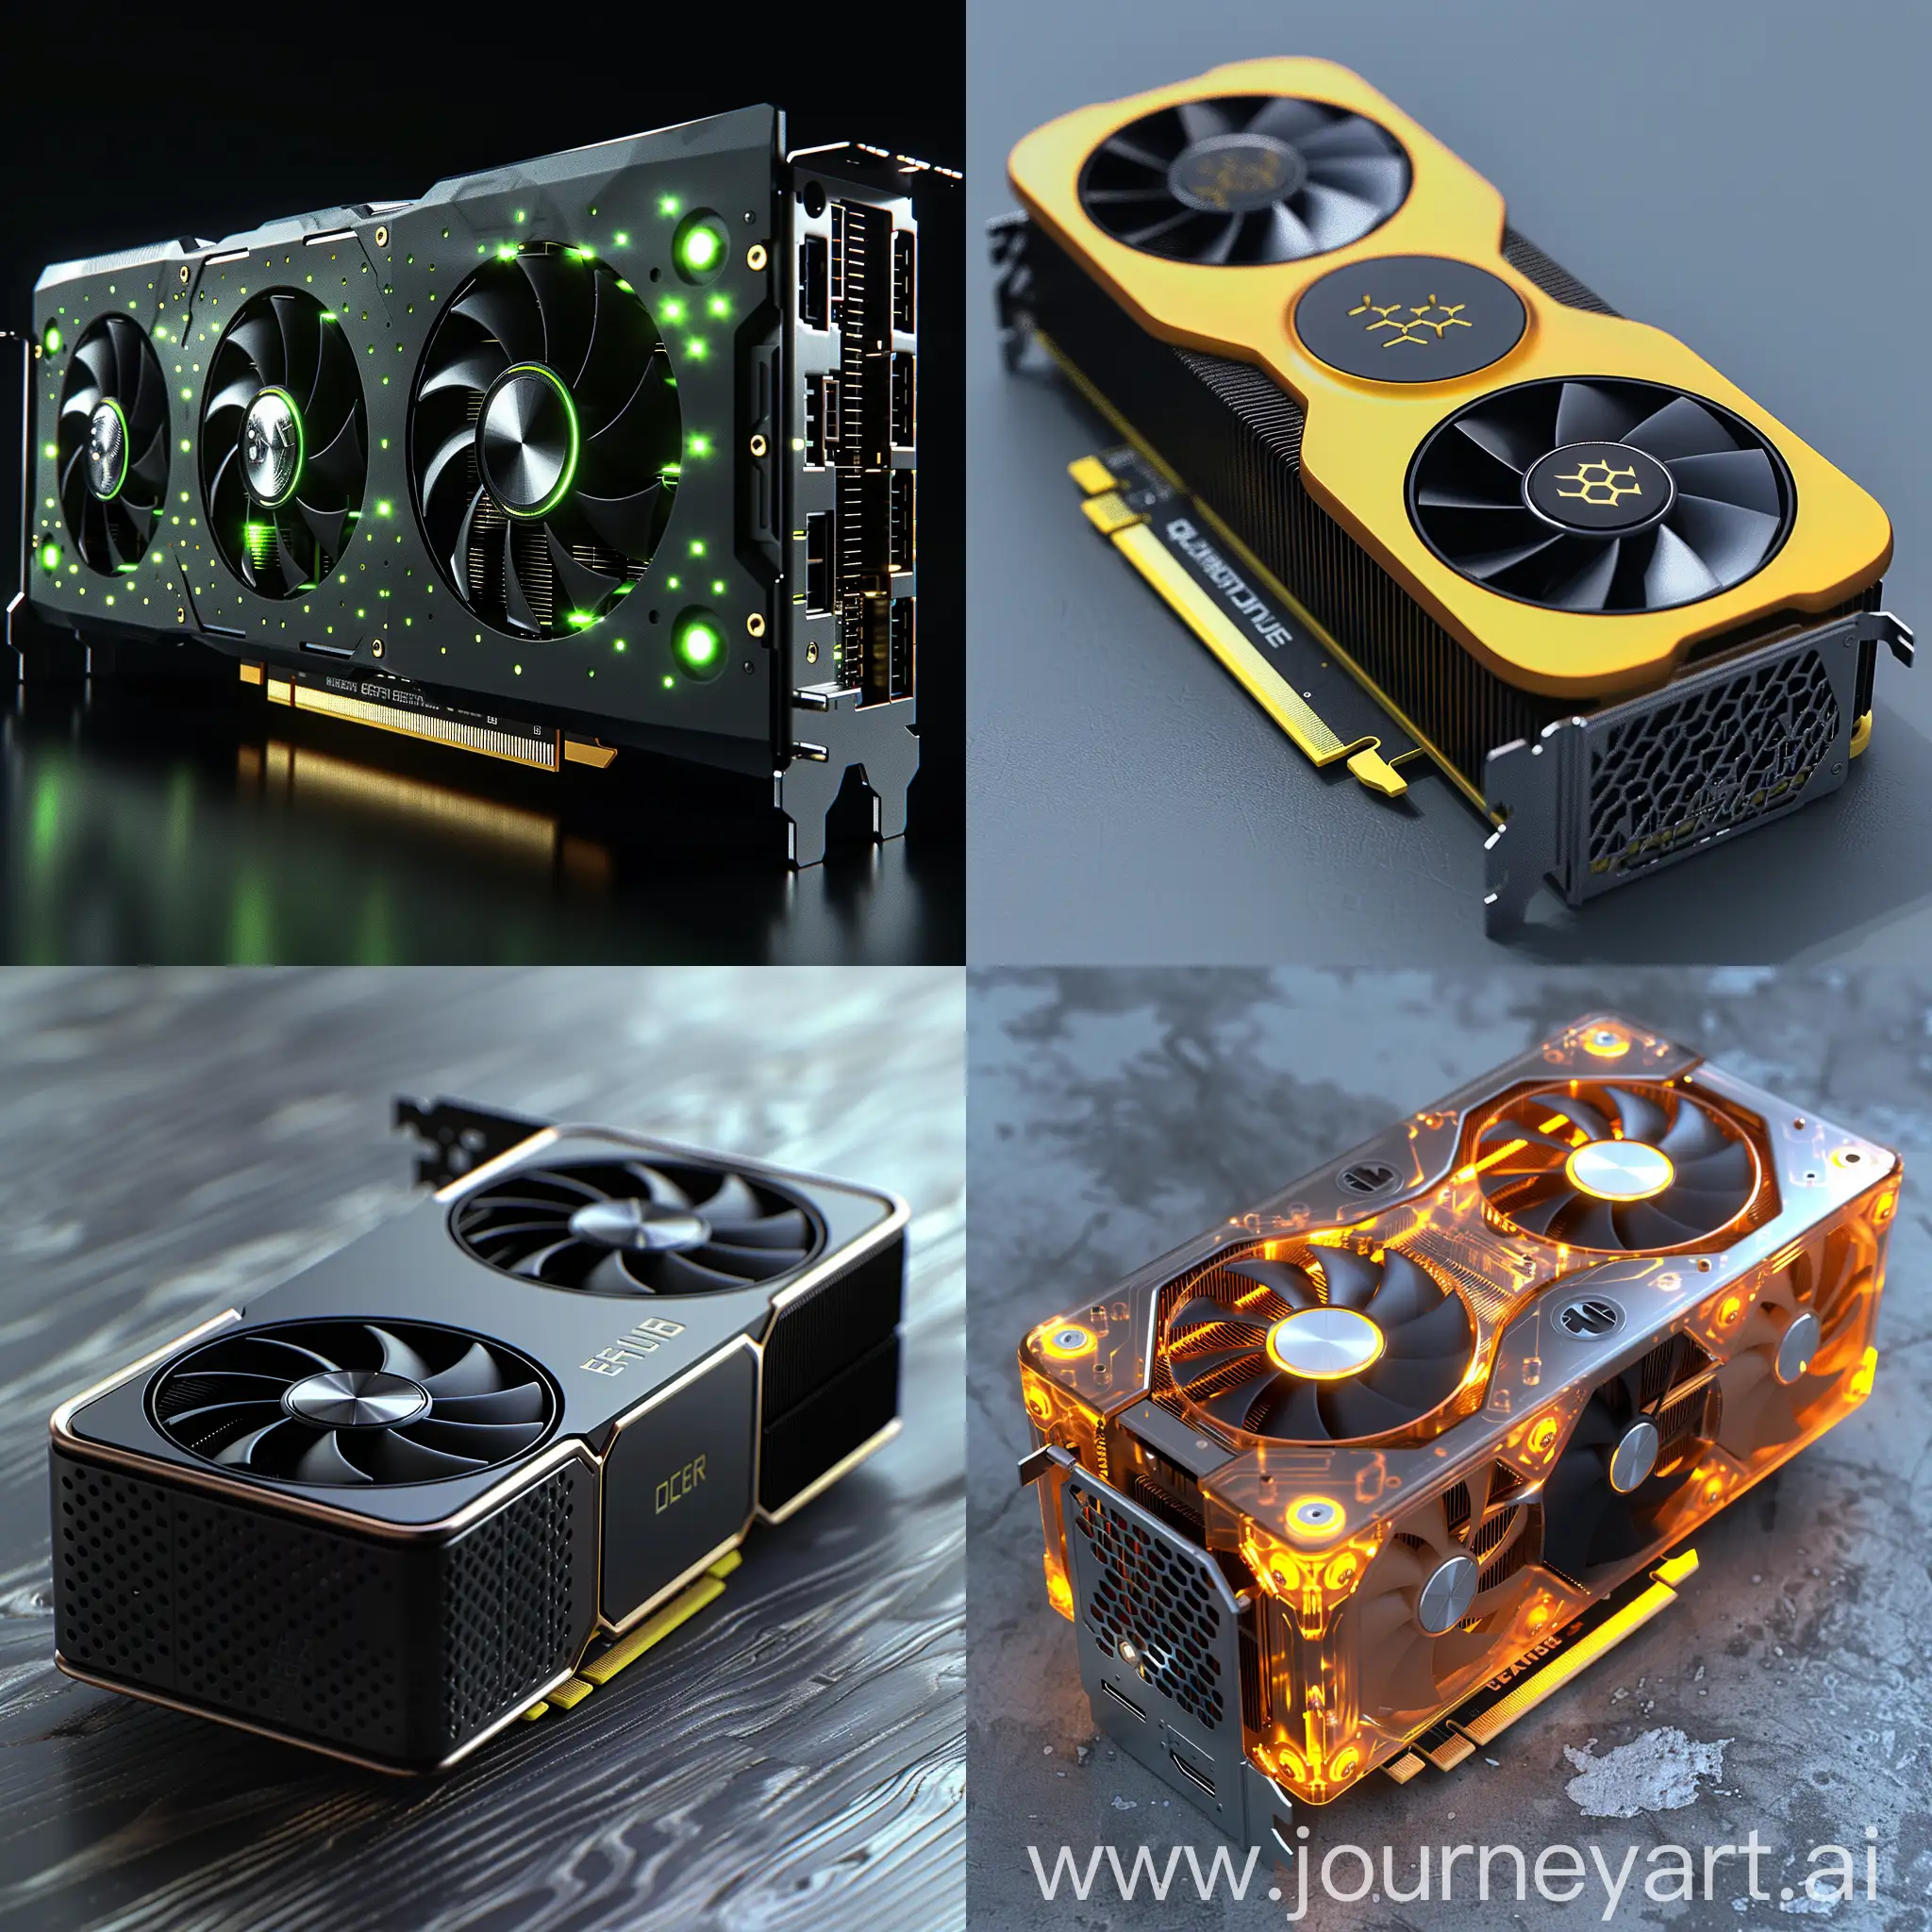 Ultramodern, futuristic PC graphics card, Biodegradable Materials, Low Power Consumption, Passive Cooling, Energy-Efficient Manufacturing, Recycled Materials, Modular Design, Cloud Processing, AI-powered Performance Optimization, Smart Power Management, Software Control for Eco-Friendly Settings, Quantum Dot Display Technology, Neural Processing Unit (NPU), Real-Time Ray Tracing, 8K Resolution and Beyond, Enhanced VR/AR Support, Brain-Computer Interface (BCI) Compatibility, Self-Learning Algorithms, Security Features, Advanced Overclocking Capabilities, Customizable Design, octane render --stylize 1000